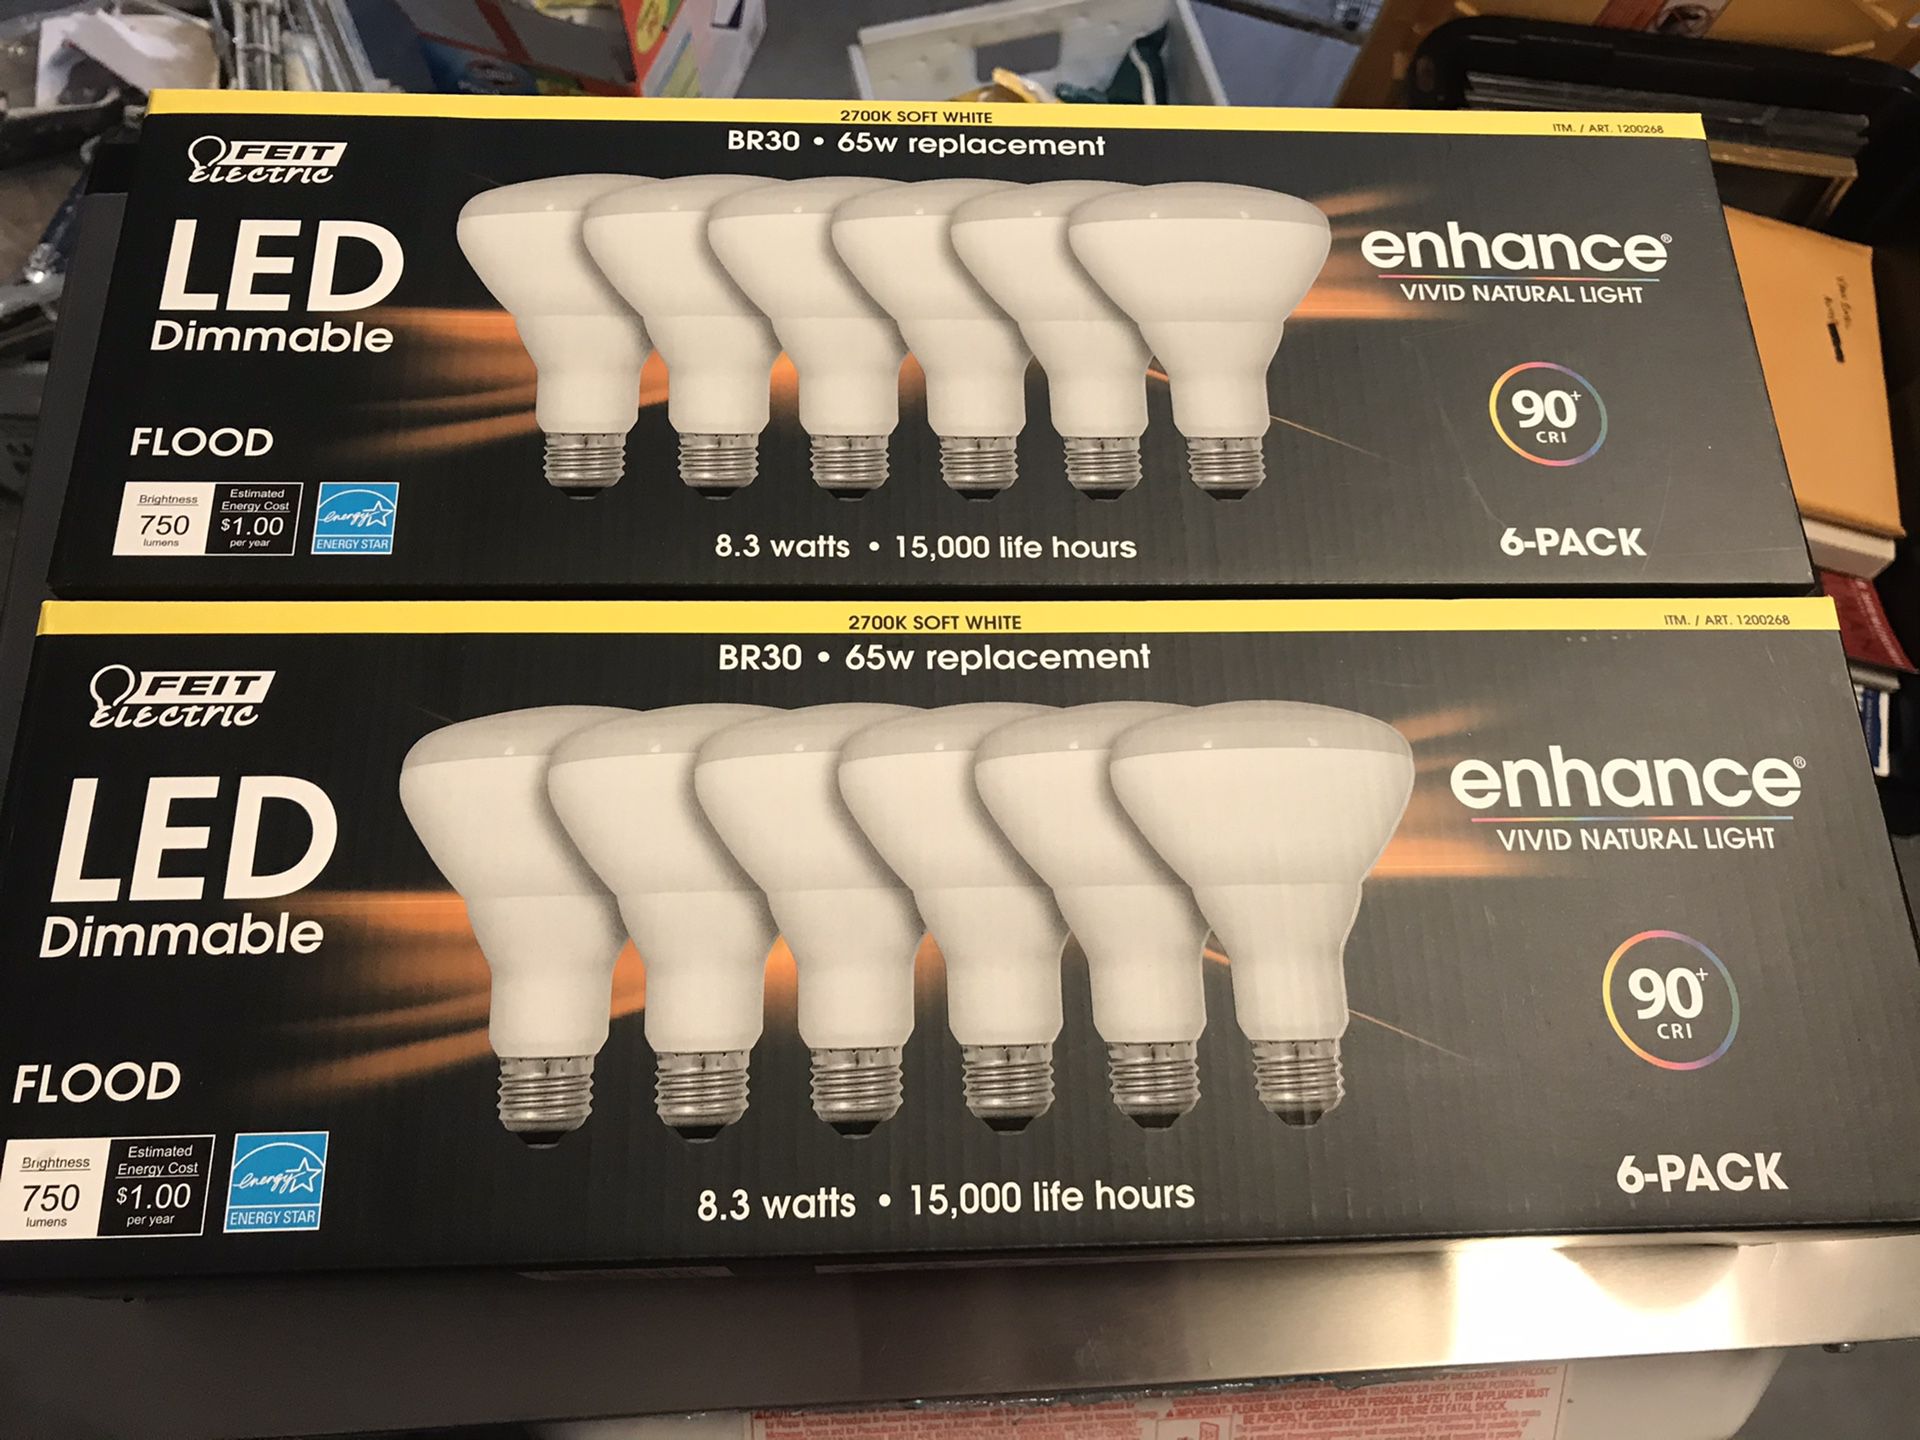 2 new boxes Feit electric LED dimmable flood lightbulbs energy efficient 65w soft white (but only uses 8.3 watts